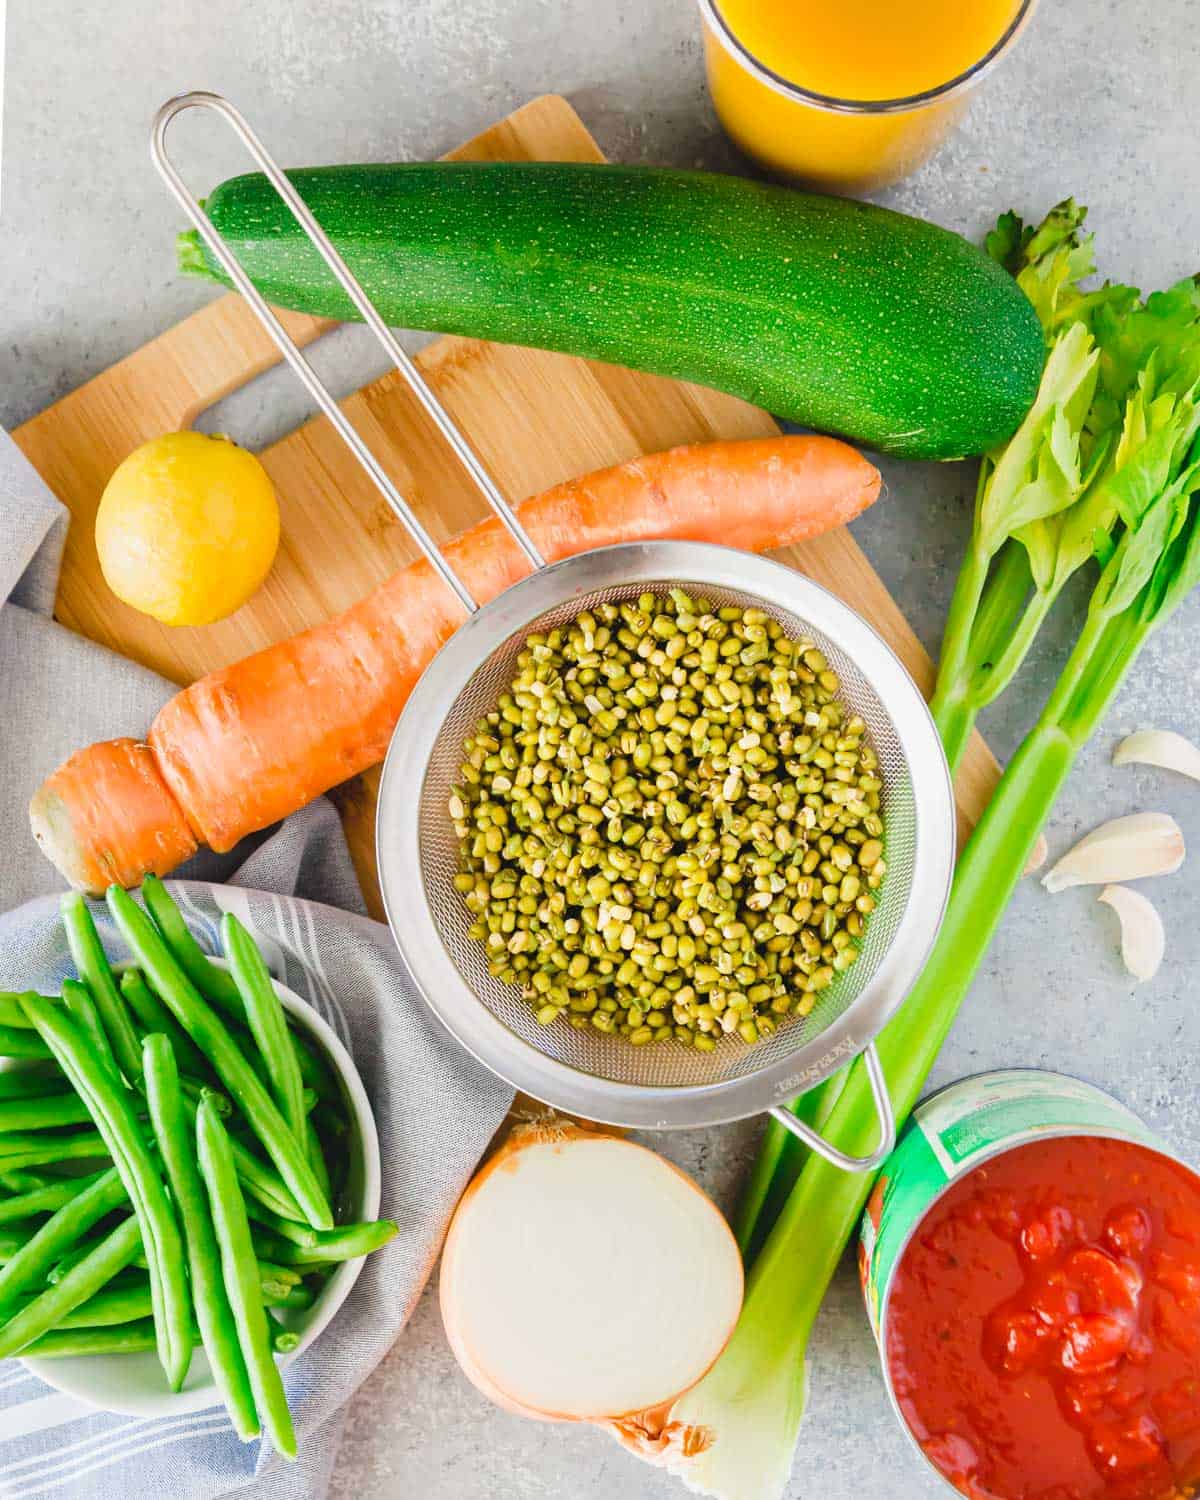 Ingredients to make mung bean soup on a cutting board: rinsed sprouted mung beans, zucchini, carrots, green beans, celery, lemon, crushed tomatoes and vegetable broth.